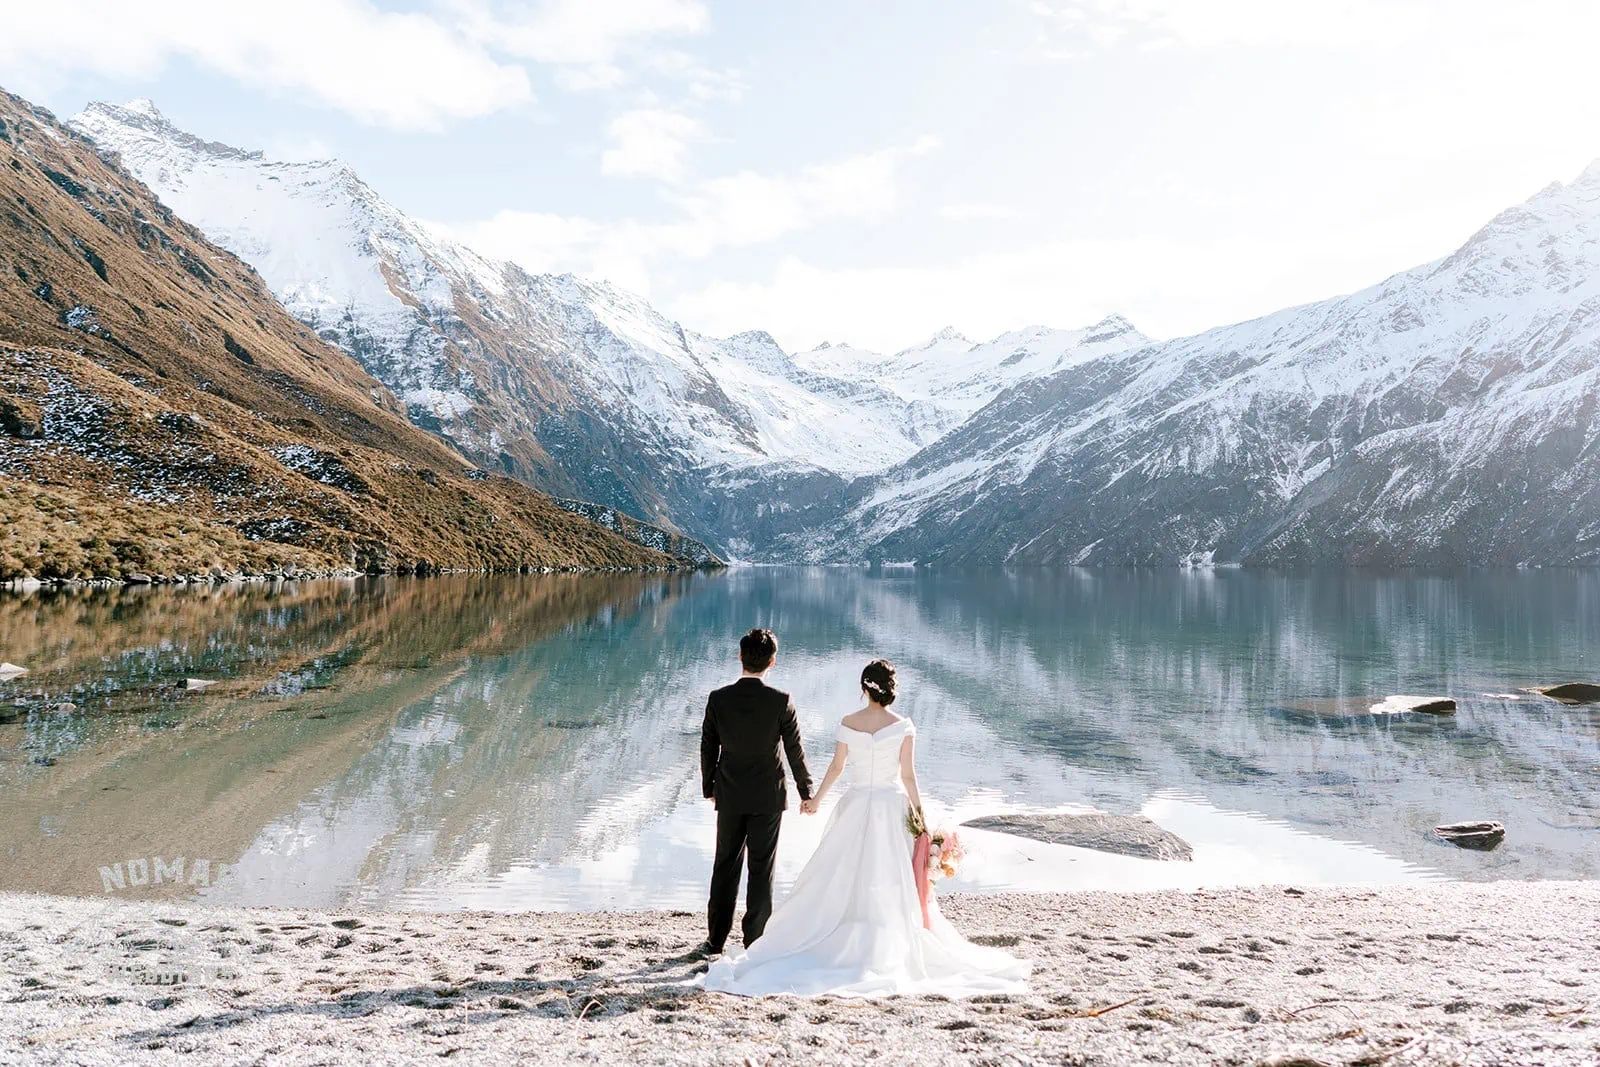 Queenstown New Zealand Elopement Wedding Photographer - A couple, Bo and Junyi, have a heli pre-wedding shoot at scenic locations in New Zealand including four landings.